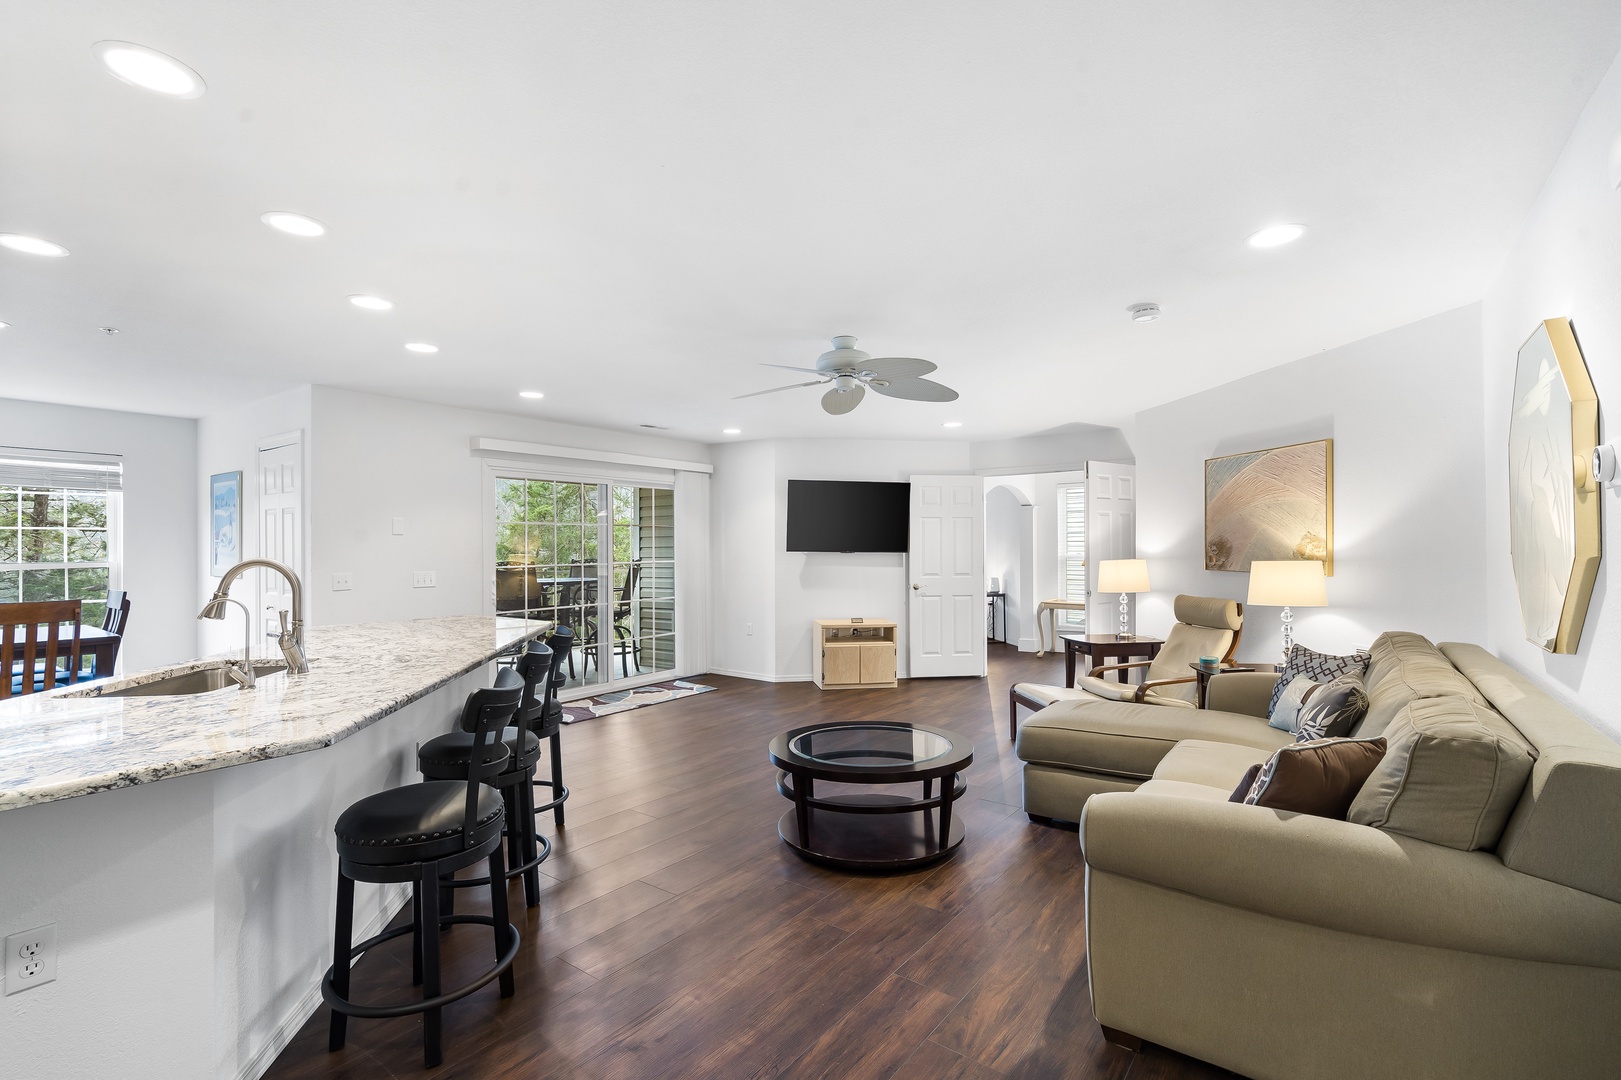 Enjoy the breezy, open layout of the main living areas